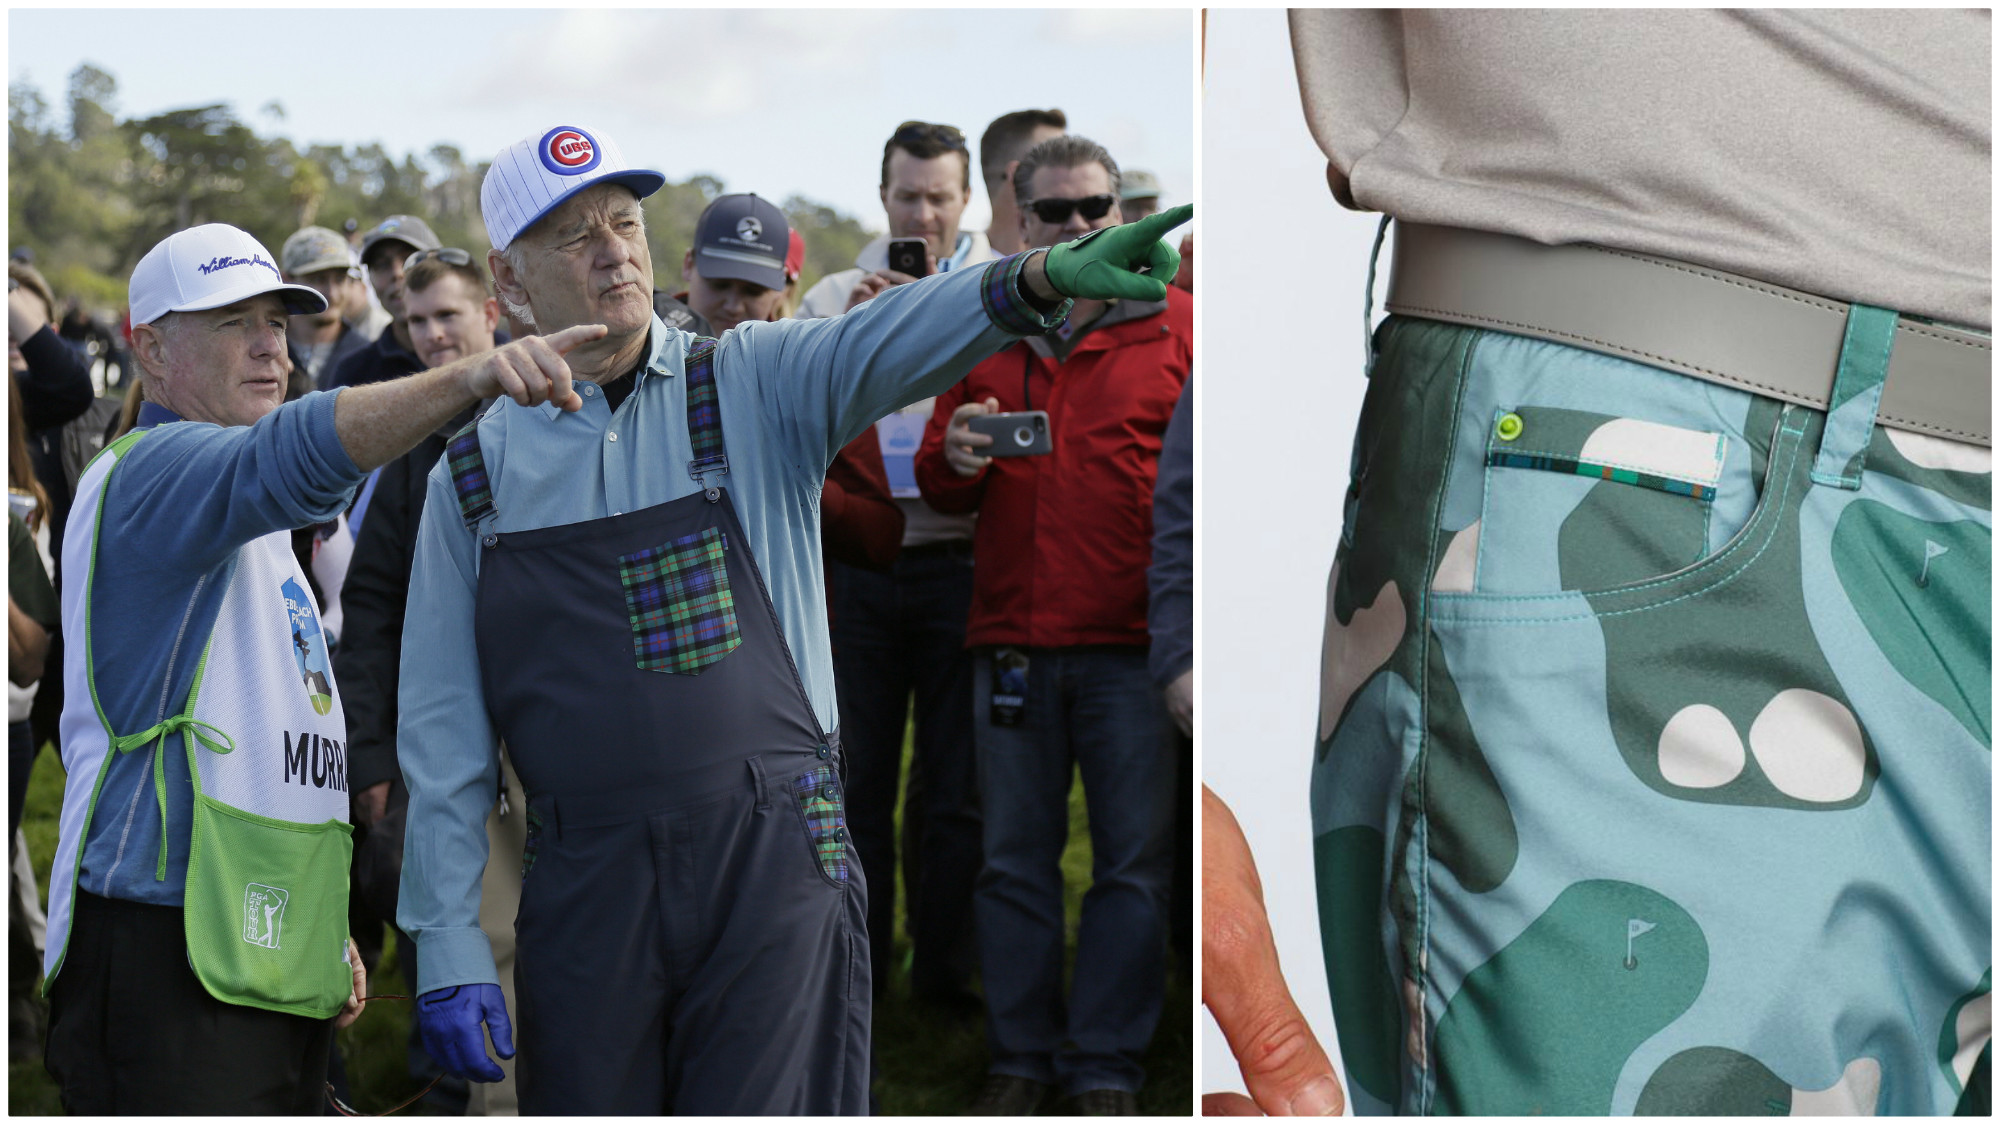 At left, Bill Murray wears a pair of custom overalls bearing a red, green and navy plaid pattern called the Murray family tartan. The pattern appears somewhere on every piece in the collection such as the edge of the ballmarker pocket of the Bunker Camo shorts, right.